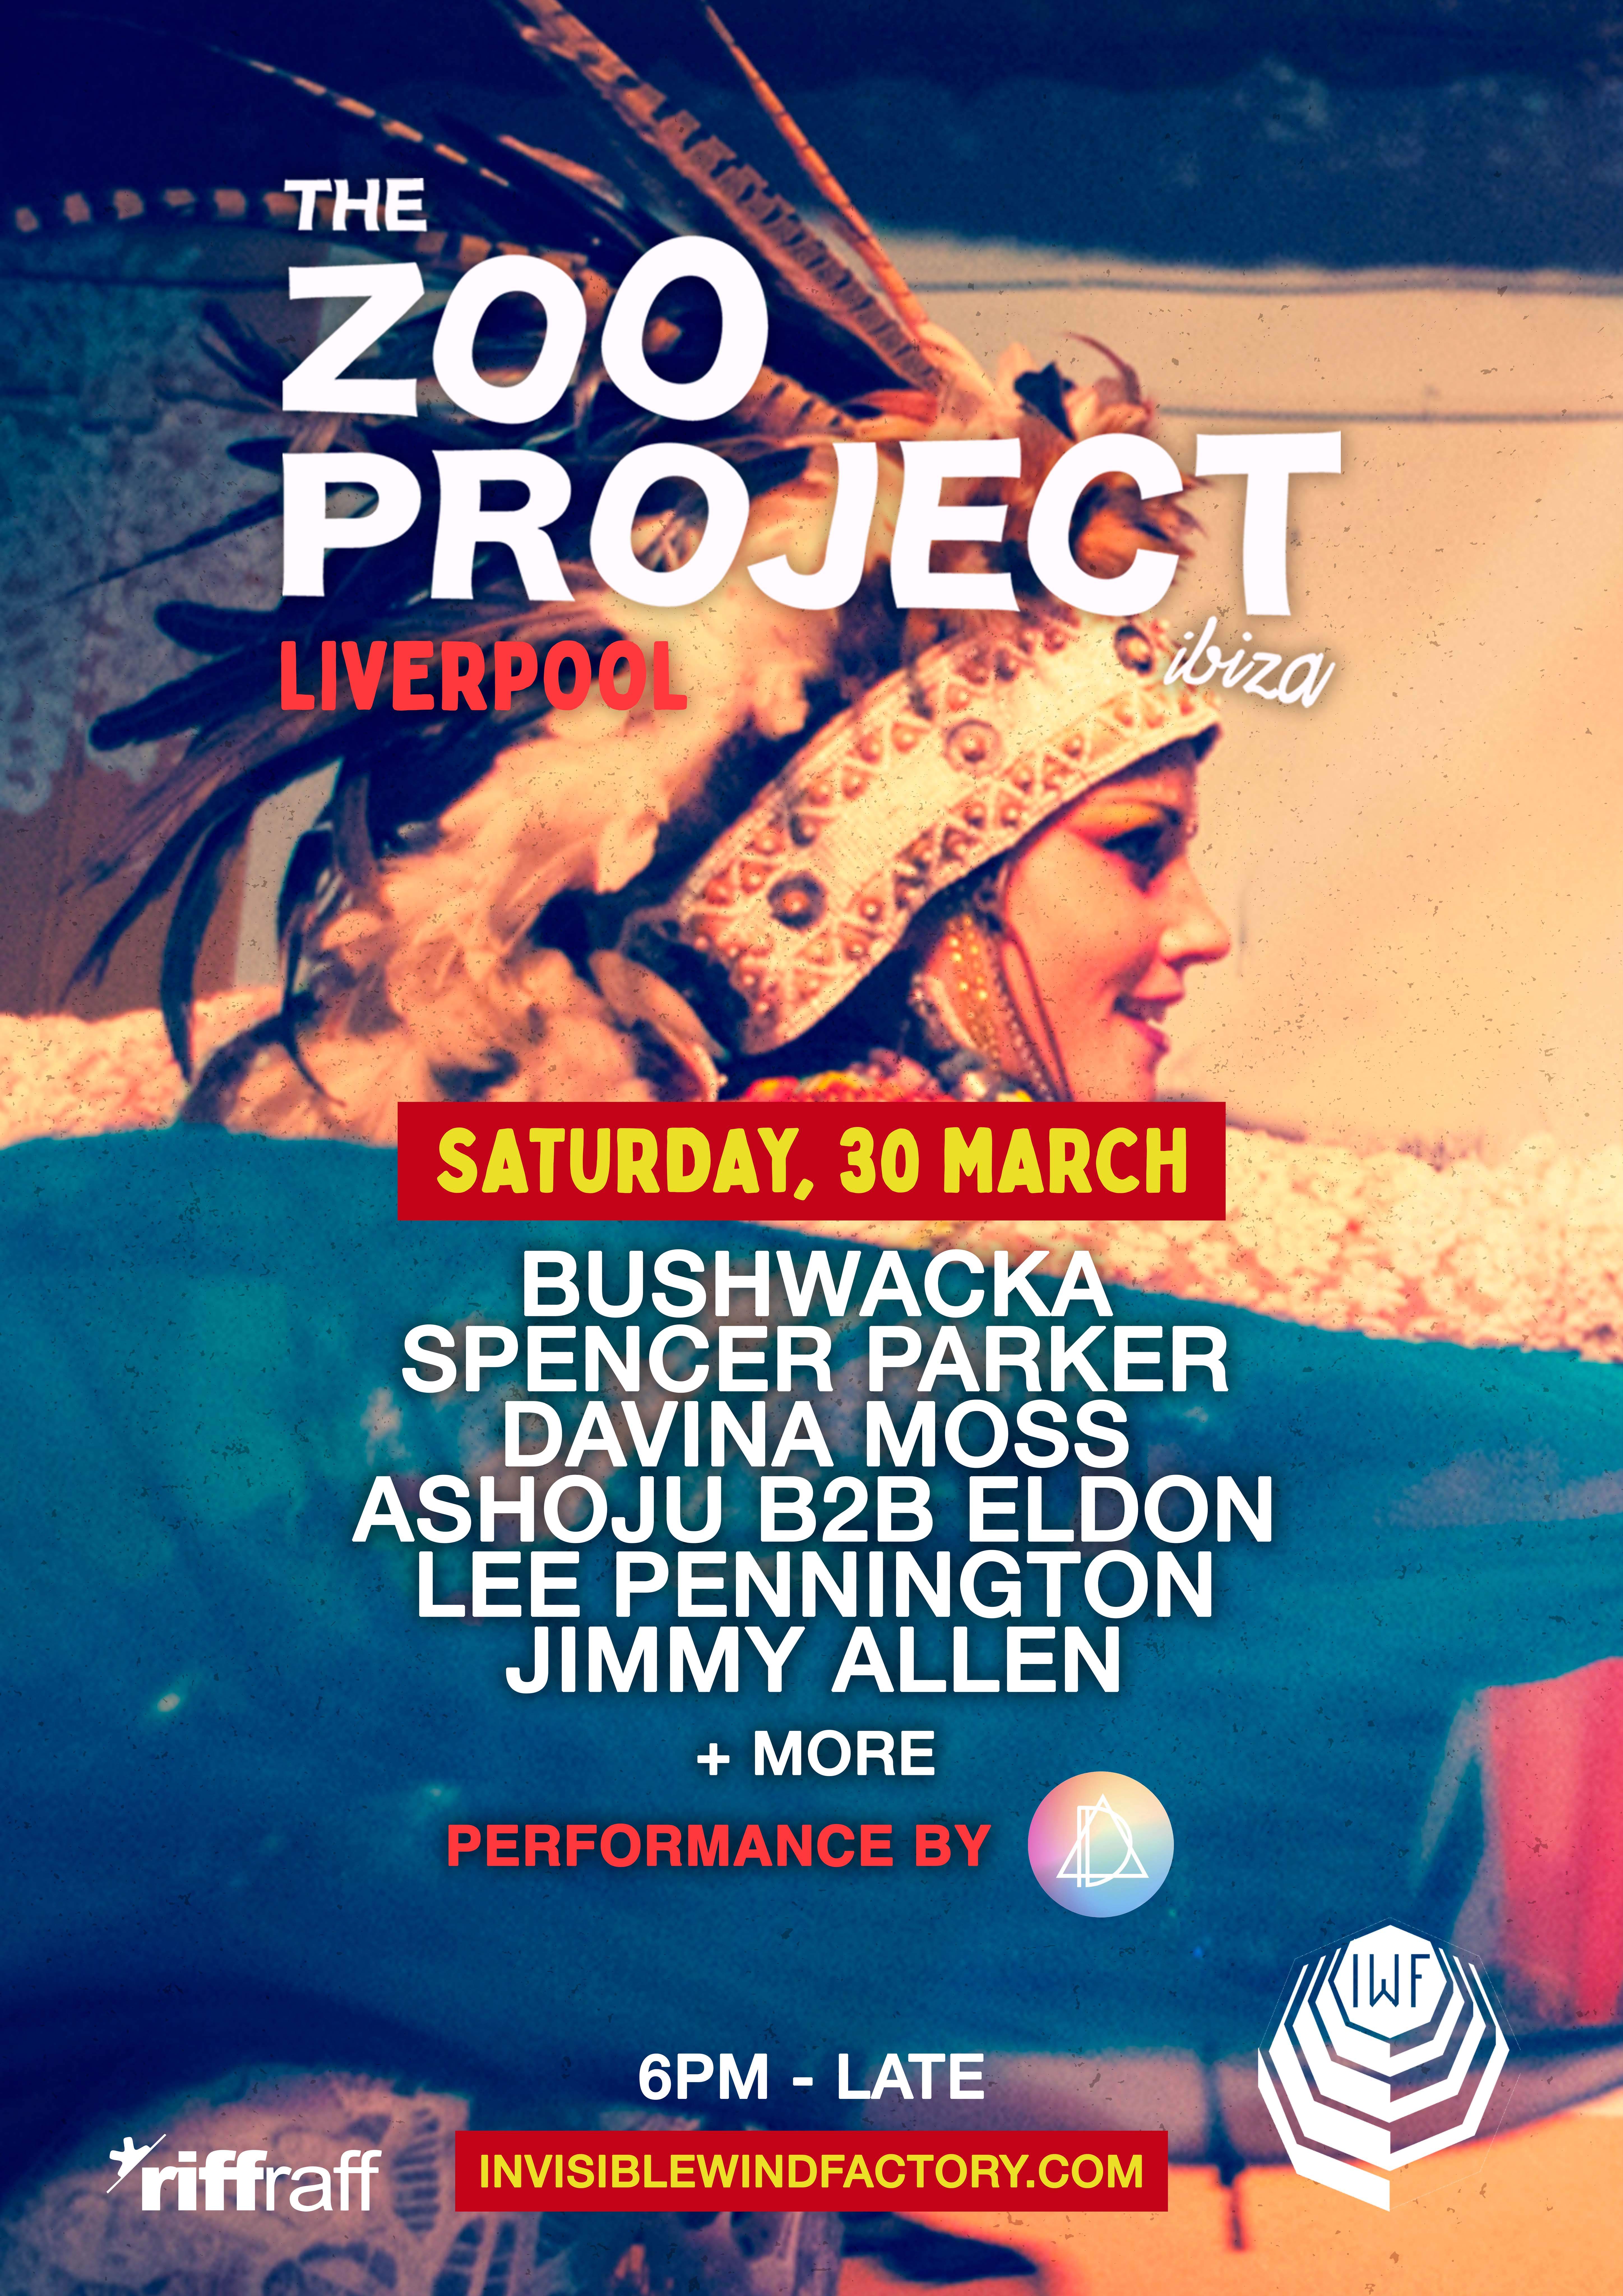 The Zoo Project Liverpool - フライヤー表